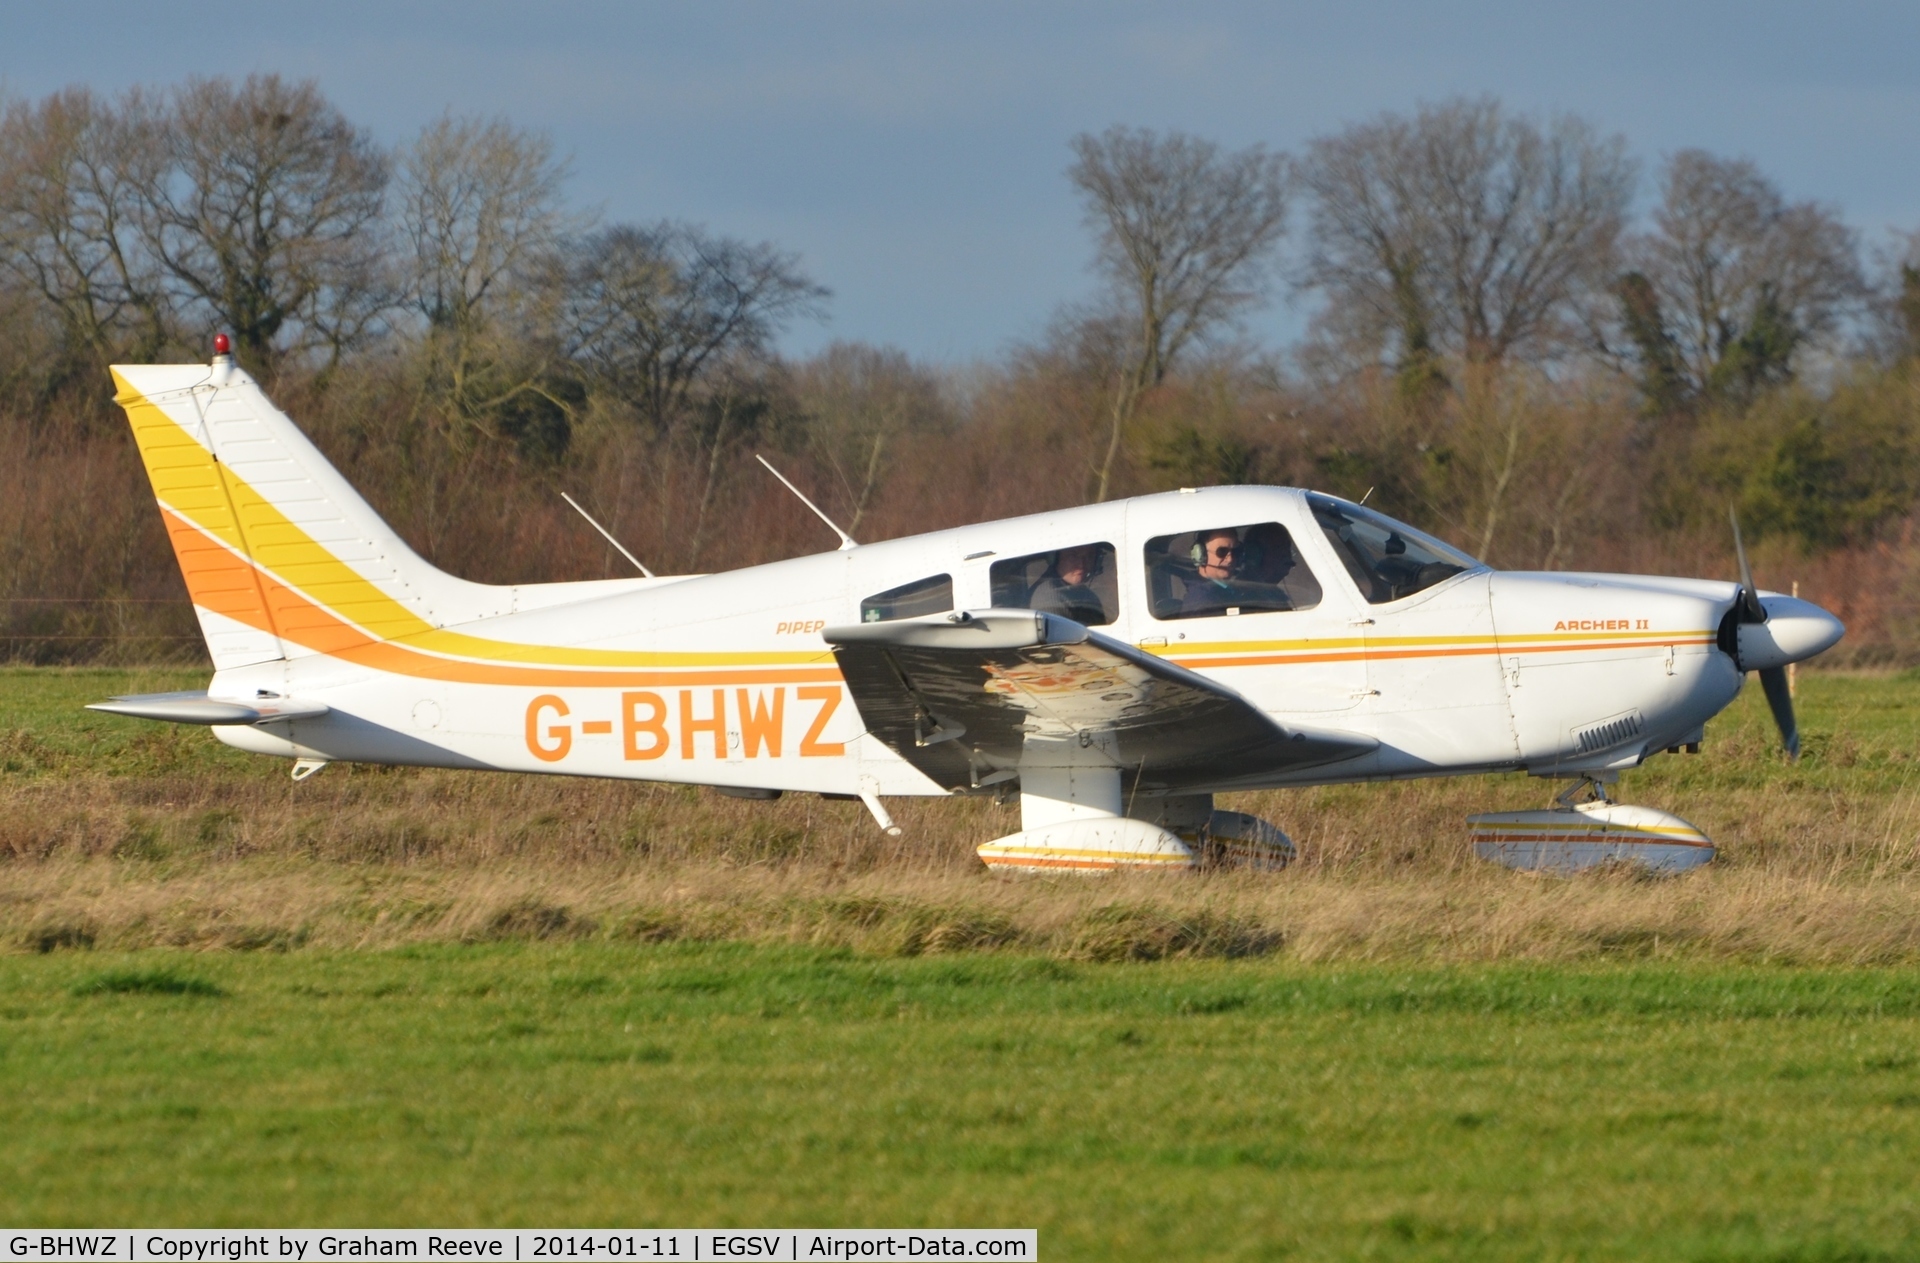 G-BHWZ, 1978 Piper PA-28-181 Cherokee Archer II C/N 28-7890299, Just landed.